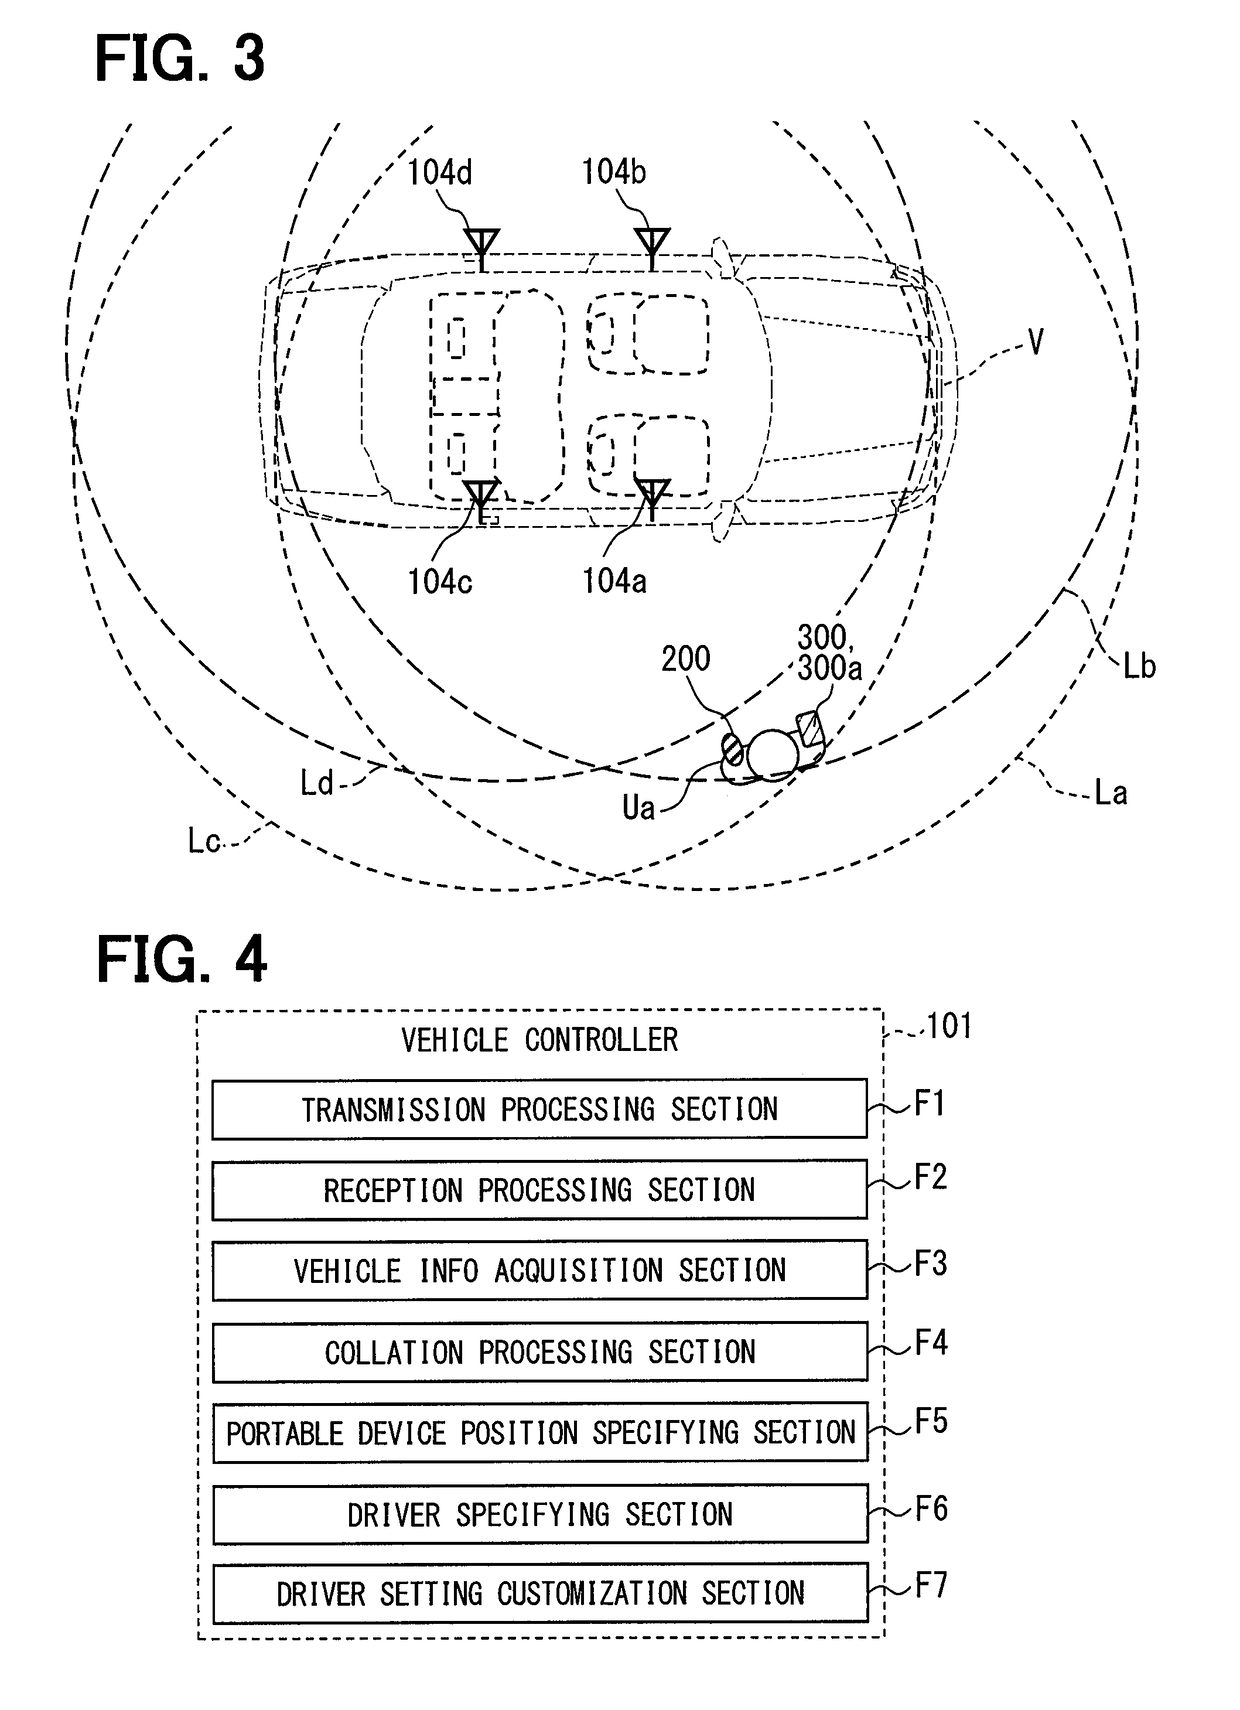 User identification system and vehicular portable device